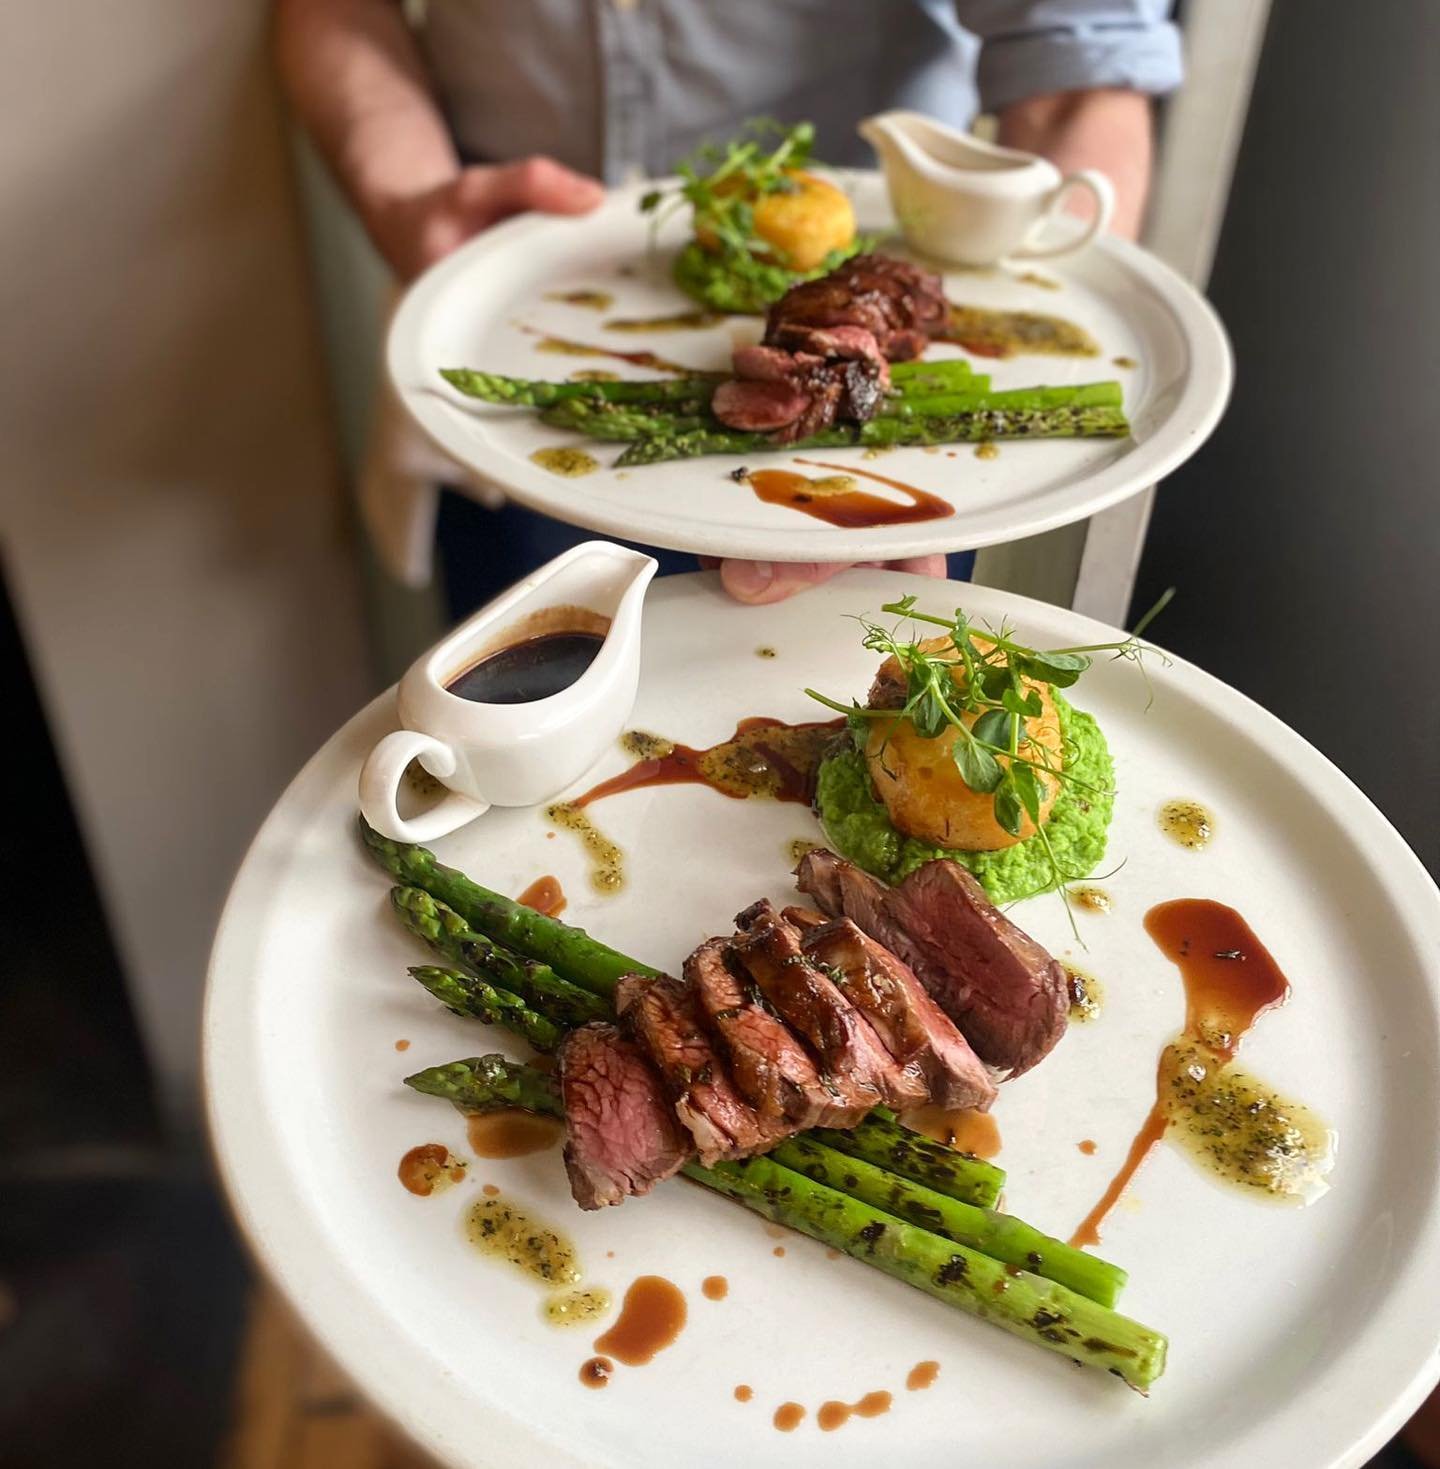 ✨Spring Menu Addition✨
Our new Spring lamb dish with fondant potato is just out of this world (if we do say so ourselves!) 
Come along and try our updated a la carte menu🥂